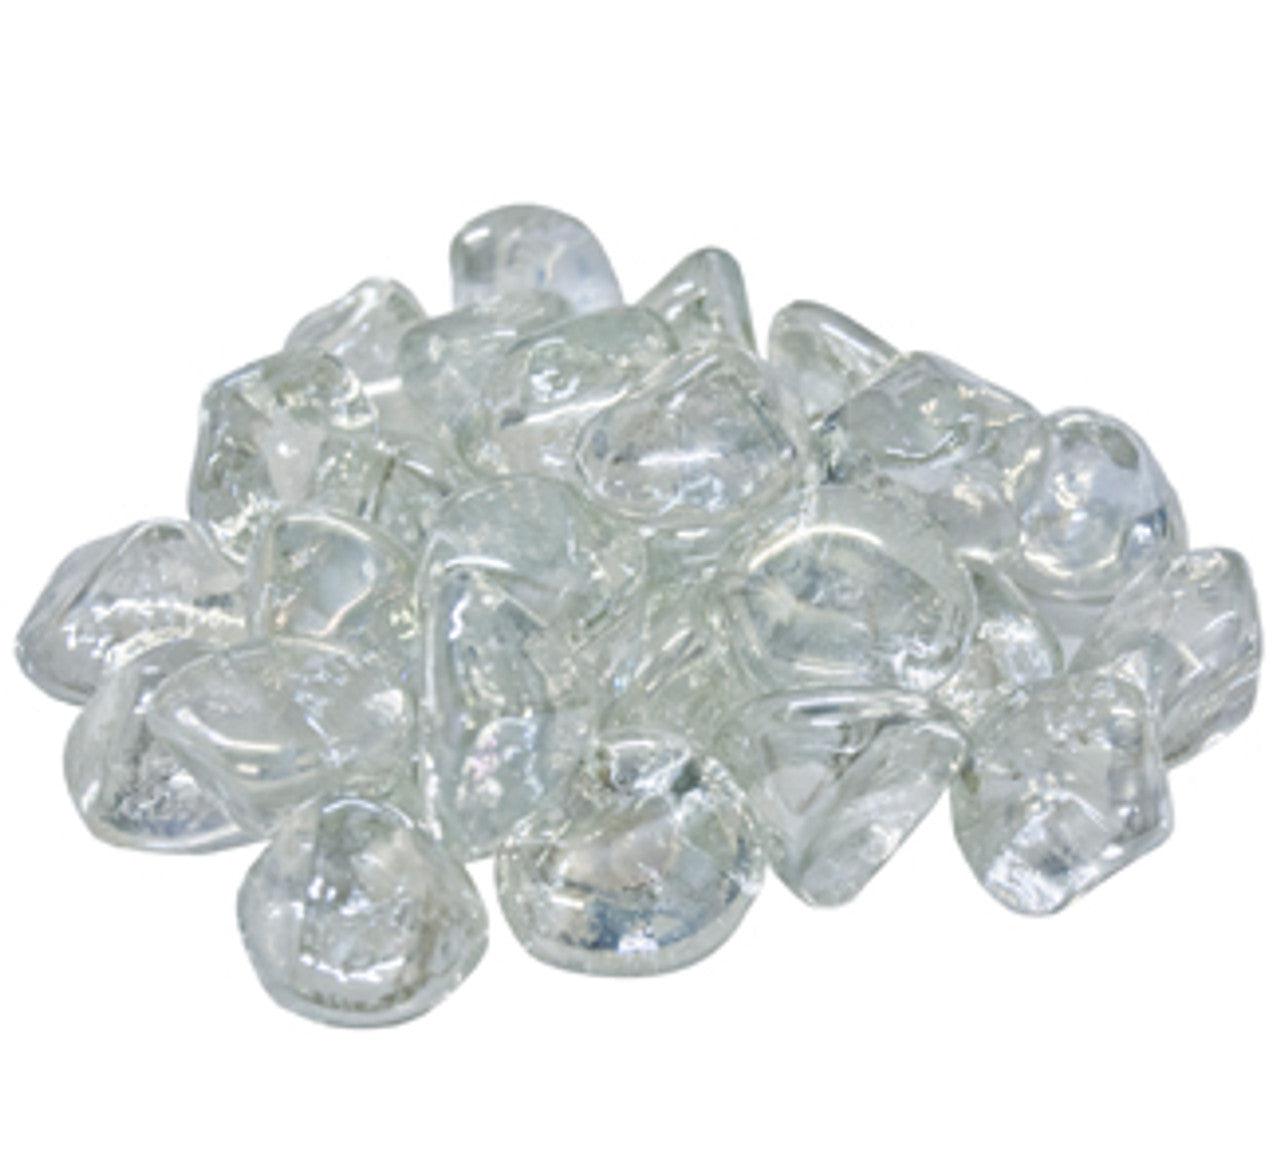 40 lb. Package of Diamond Nuggets Glass Media